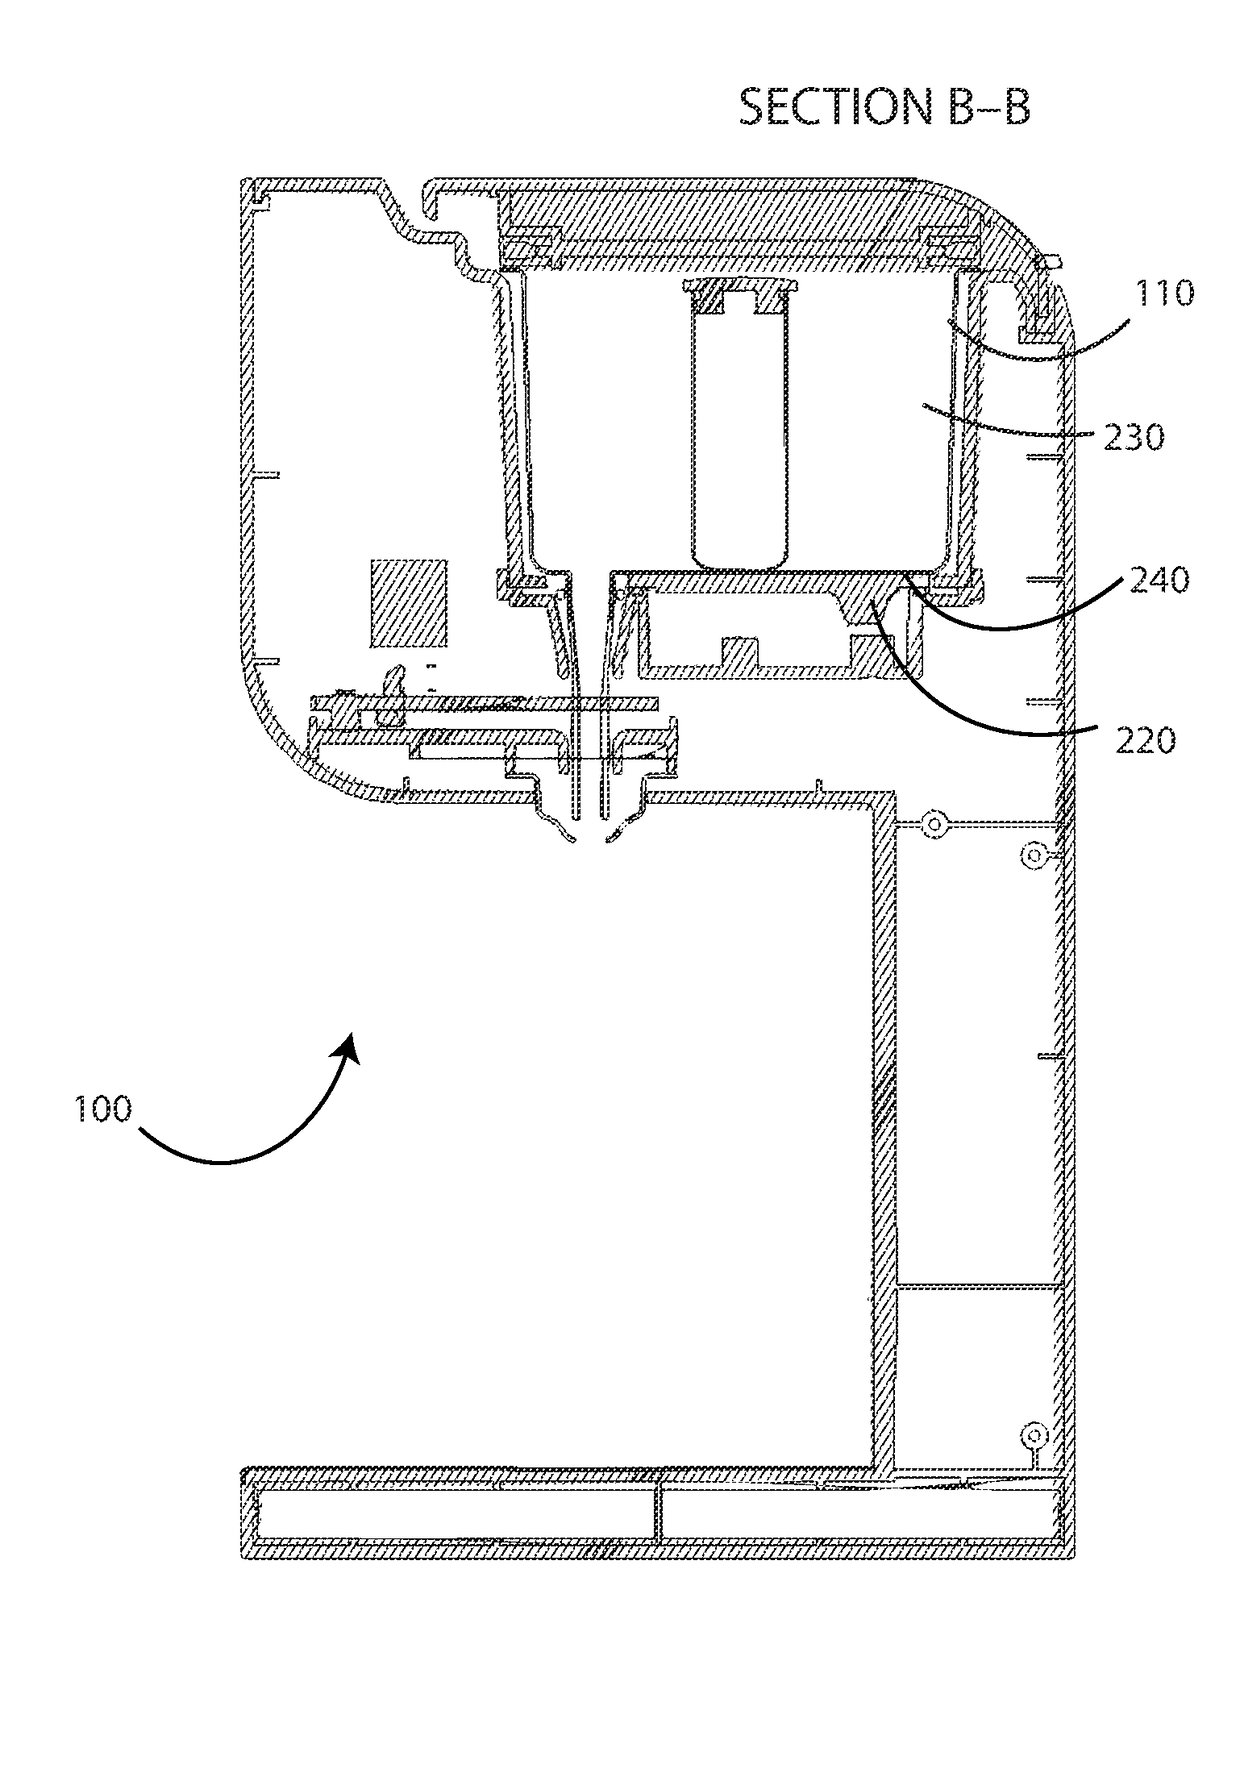 Apparatus for infusing and dispensing oils